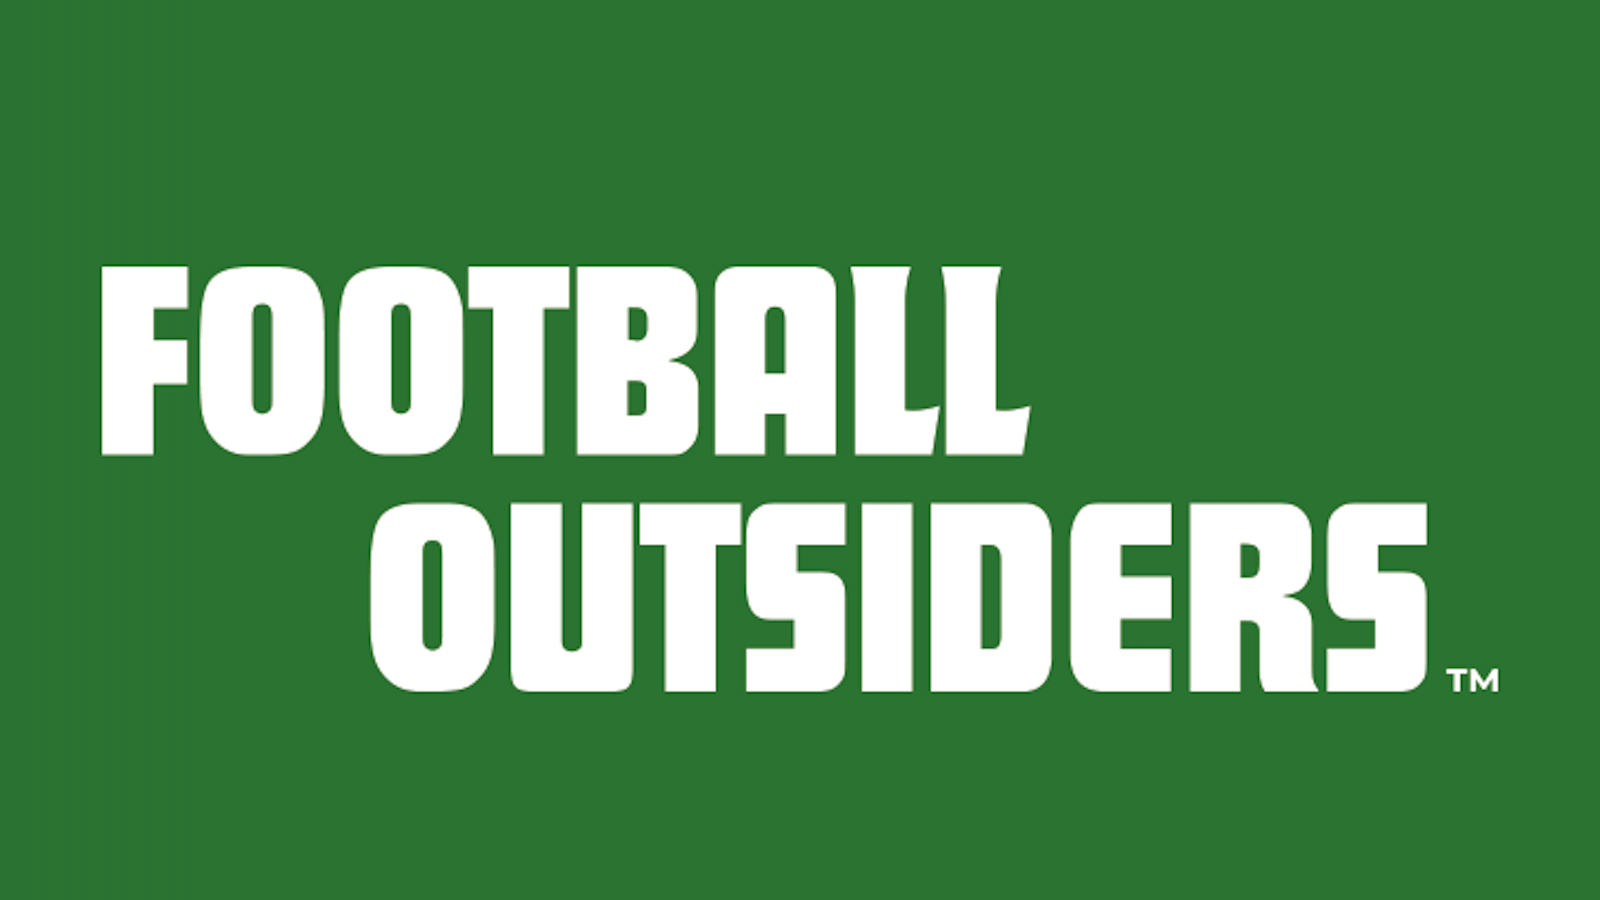 Football Outsiders logo on green background